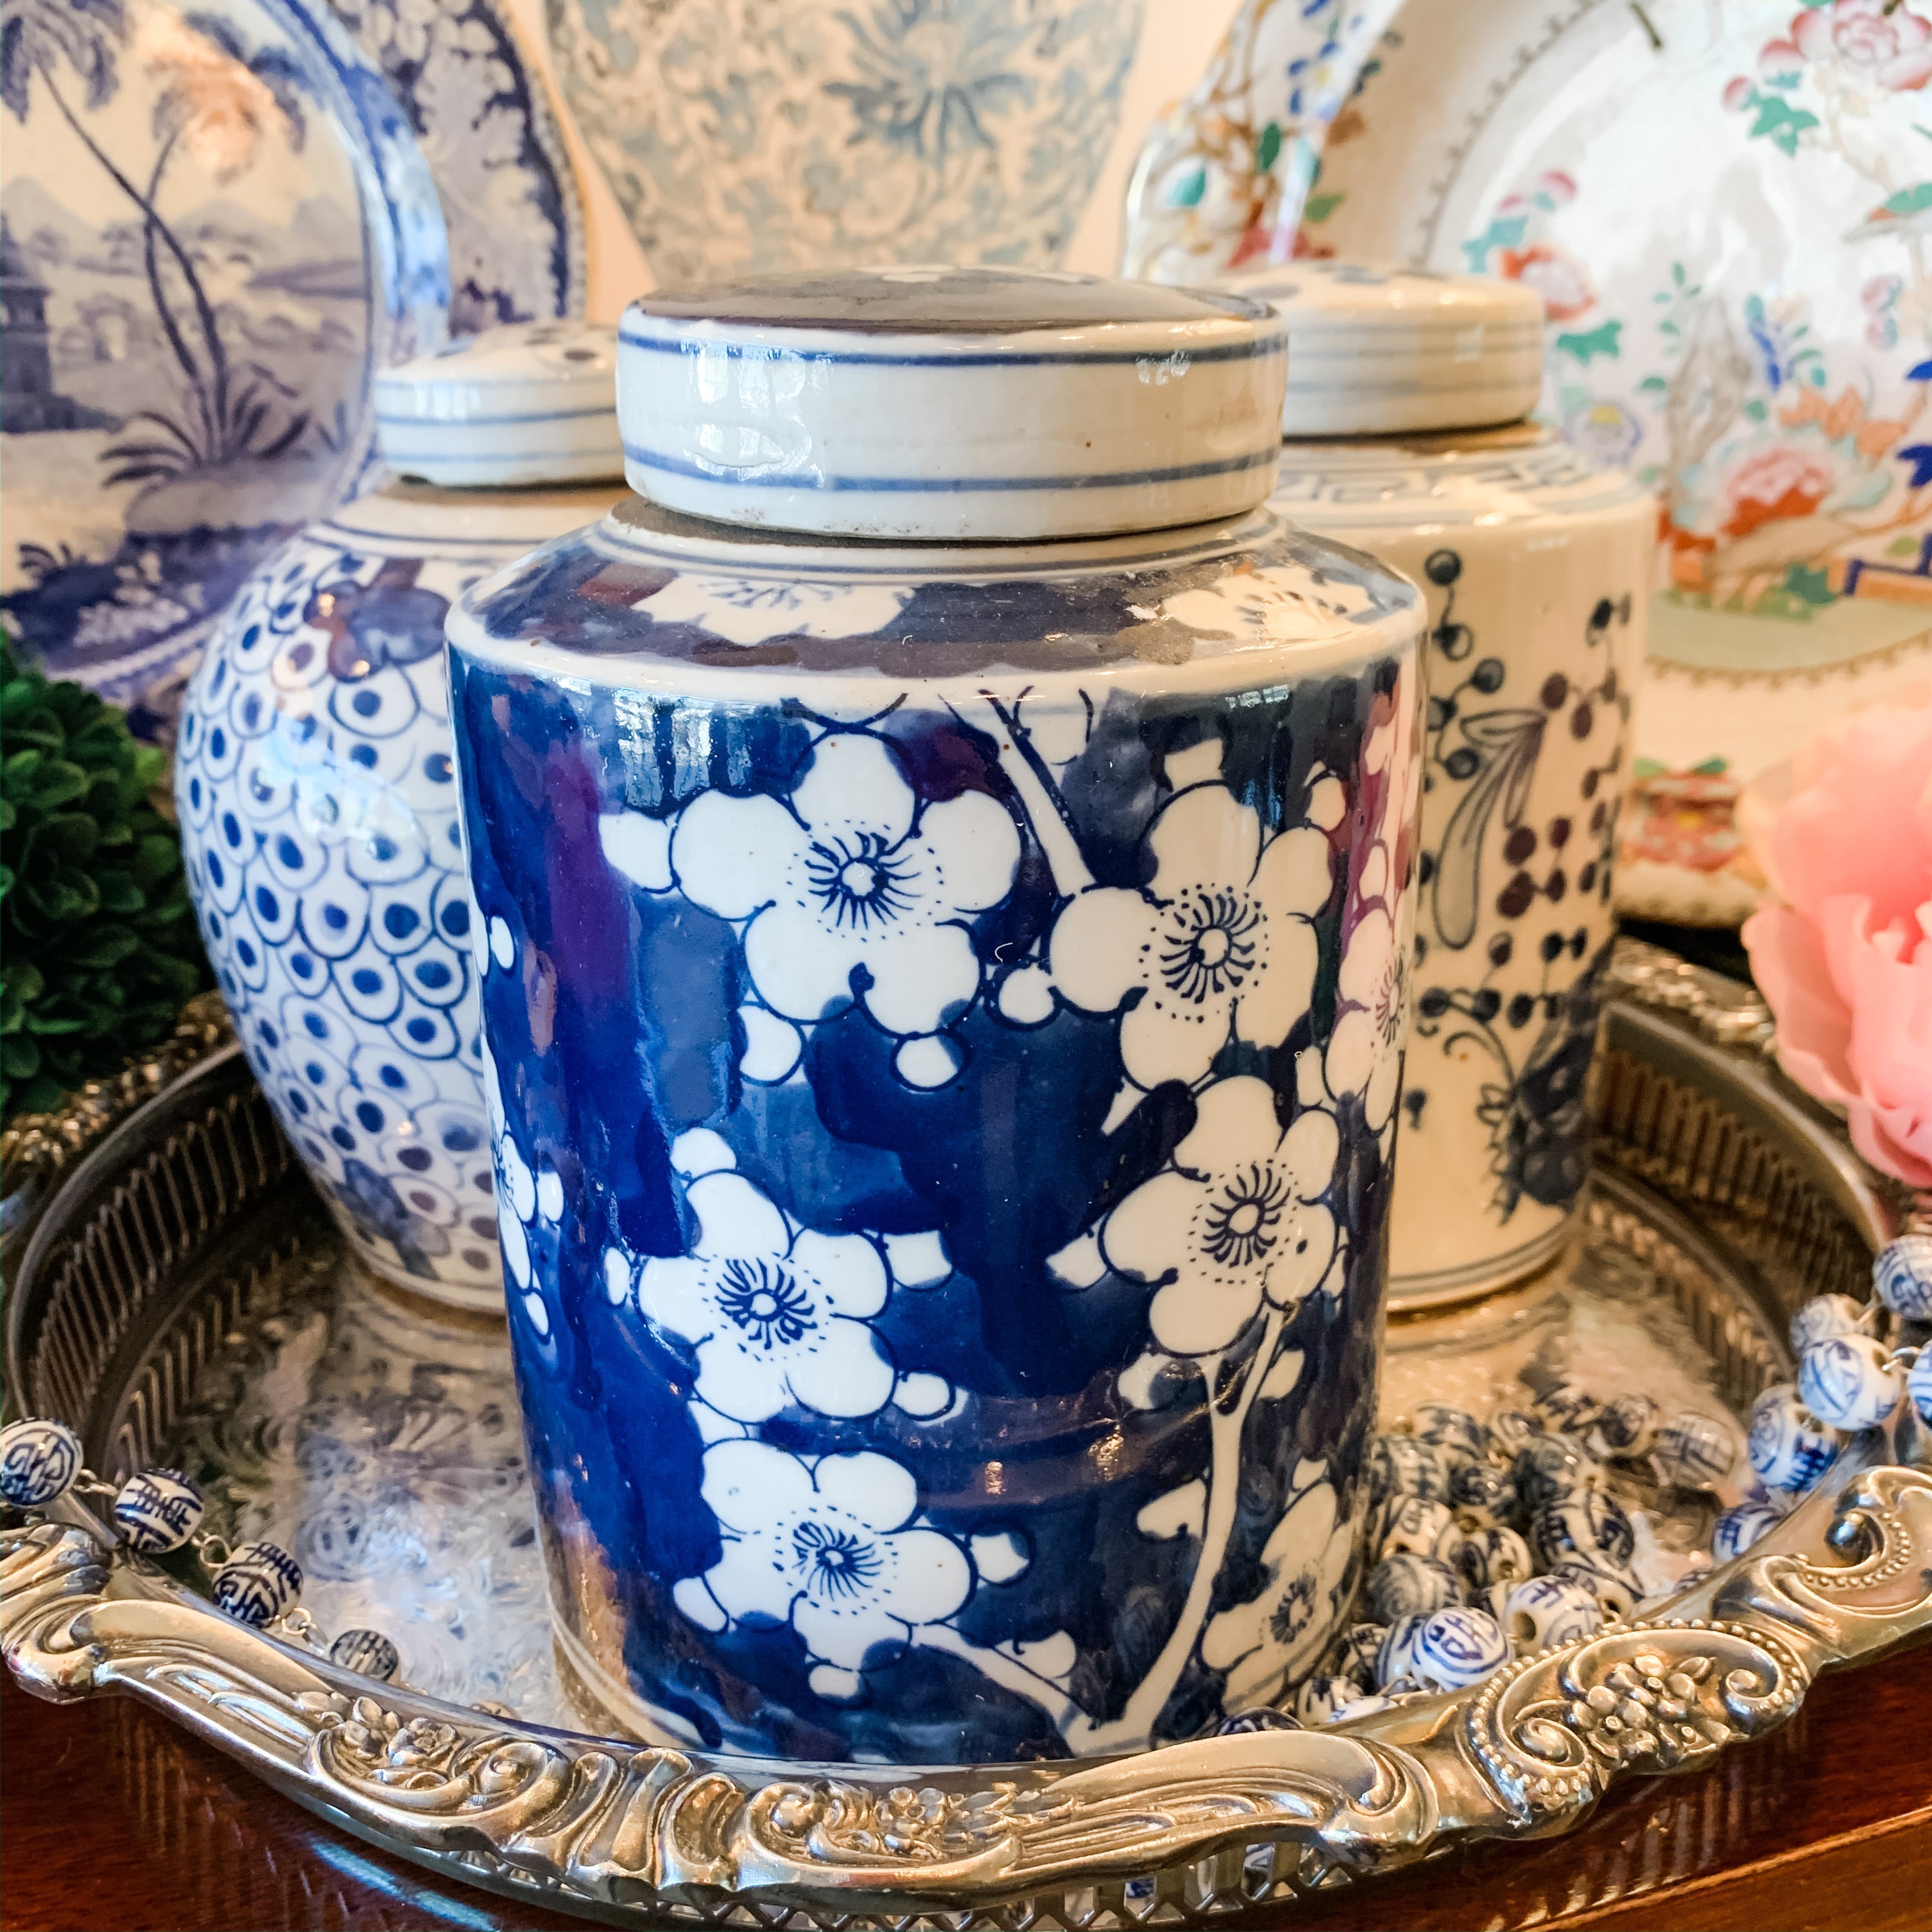 Shop Collectible Brooks for a wide selection of classic blue and white porcelain jars, perfect for adding a touch of chinoiserie to your home decor!  This beautiful hand painted jar is made in the antique style and features a cherry blossom design.  It stands 7.5" tall.  